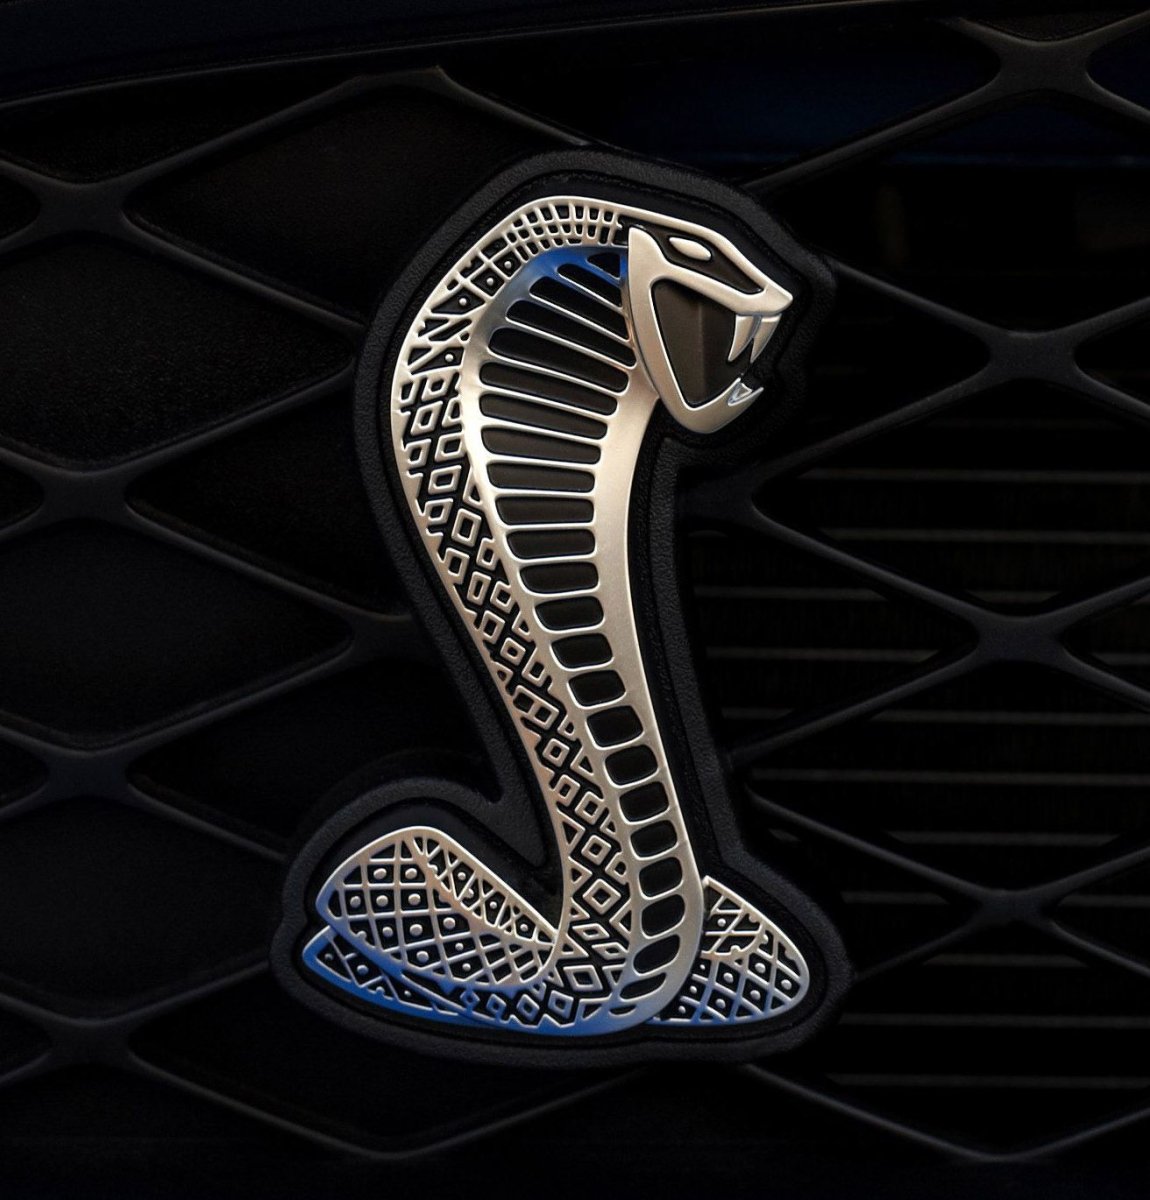 Ford Mustang Shelby gt500 logo